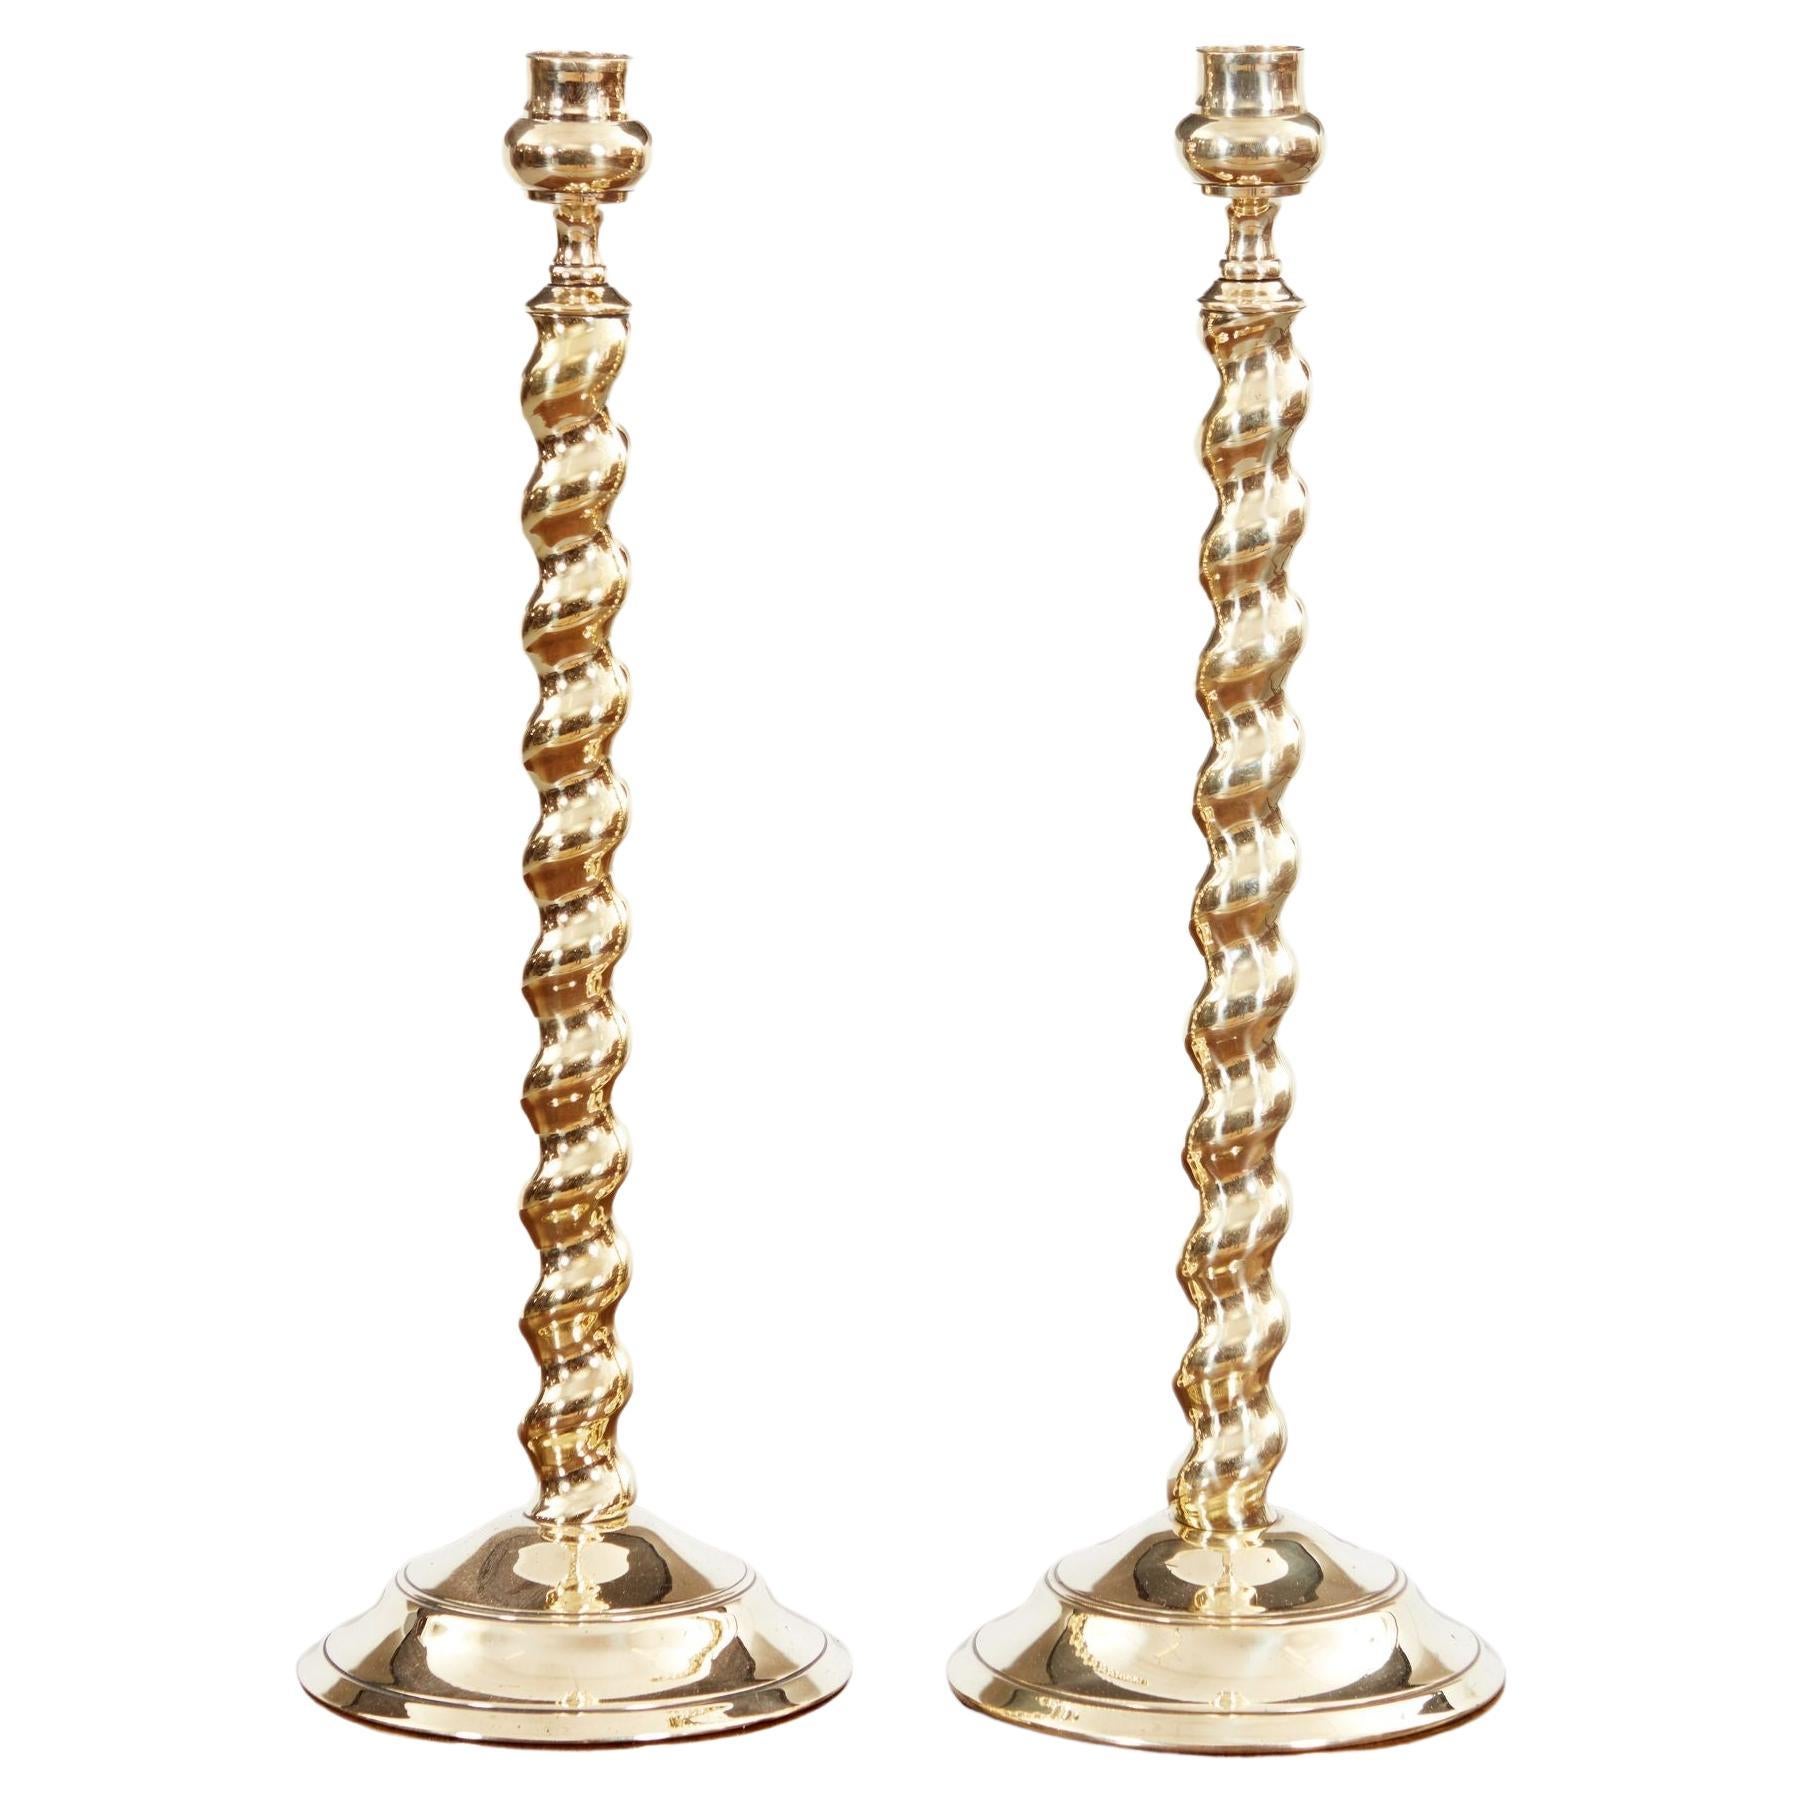 Pair of Tall Brass Barley Twist Candlesticks For Sale at 1stDibs